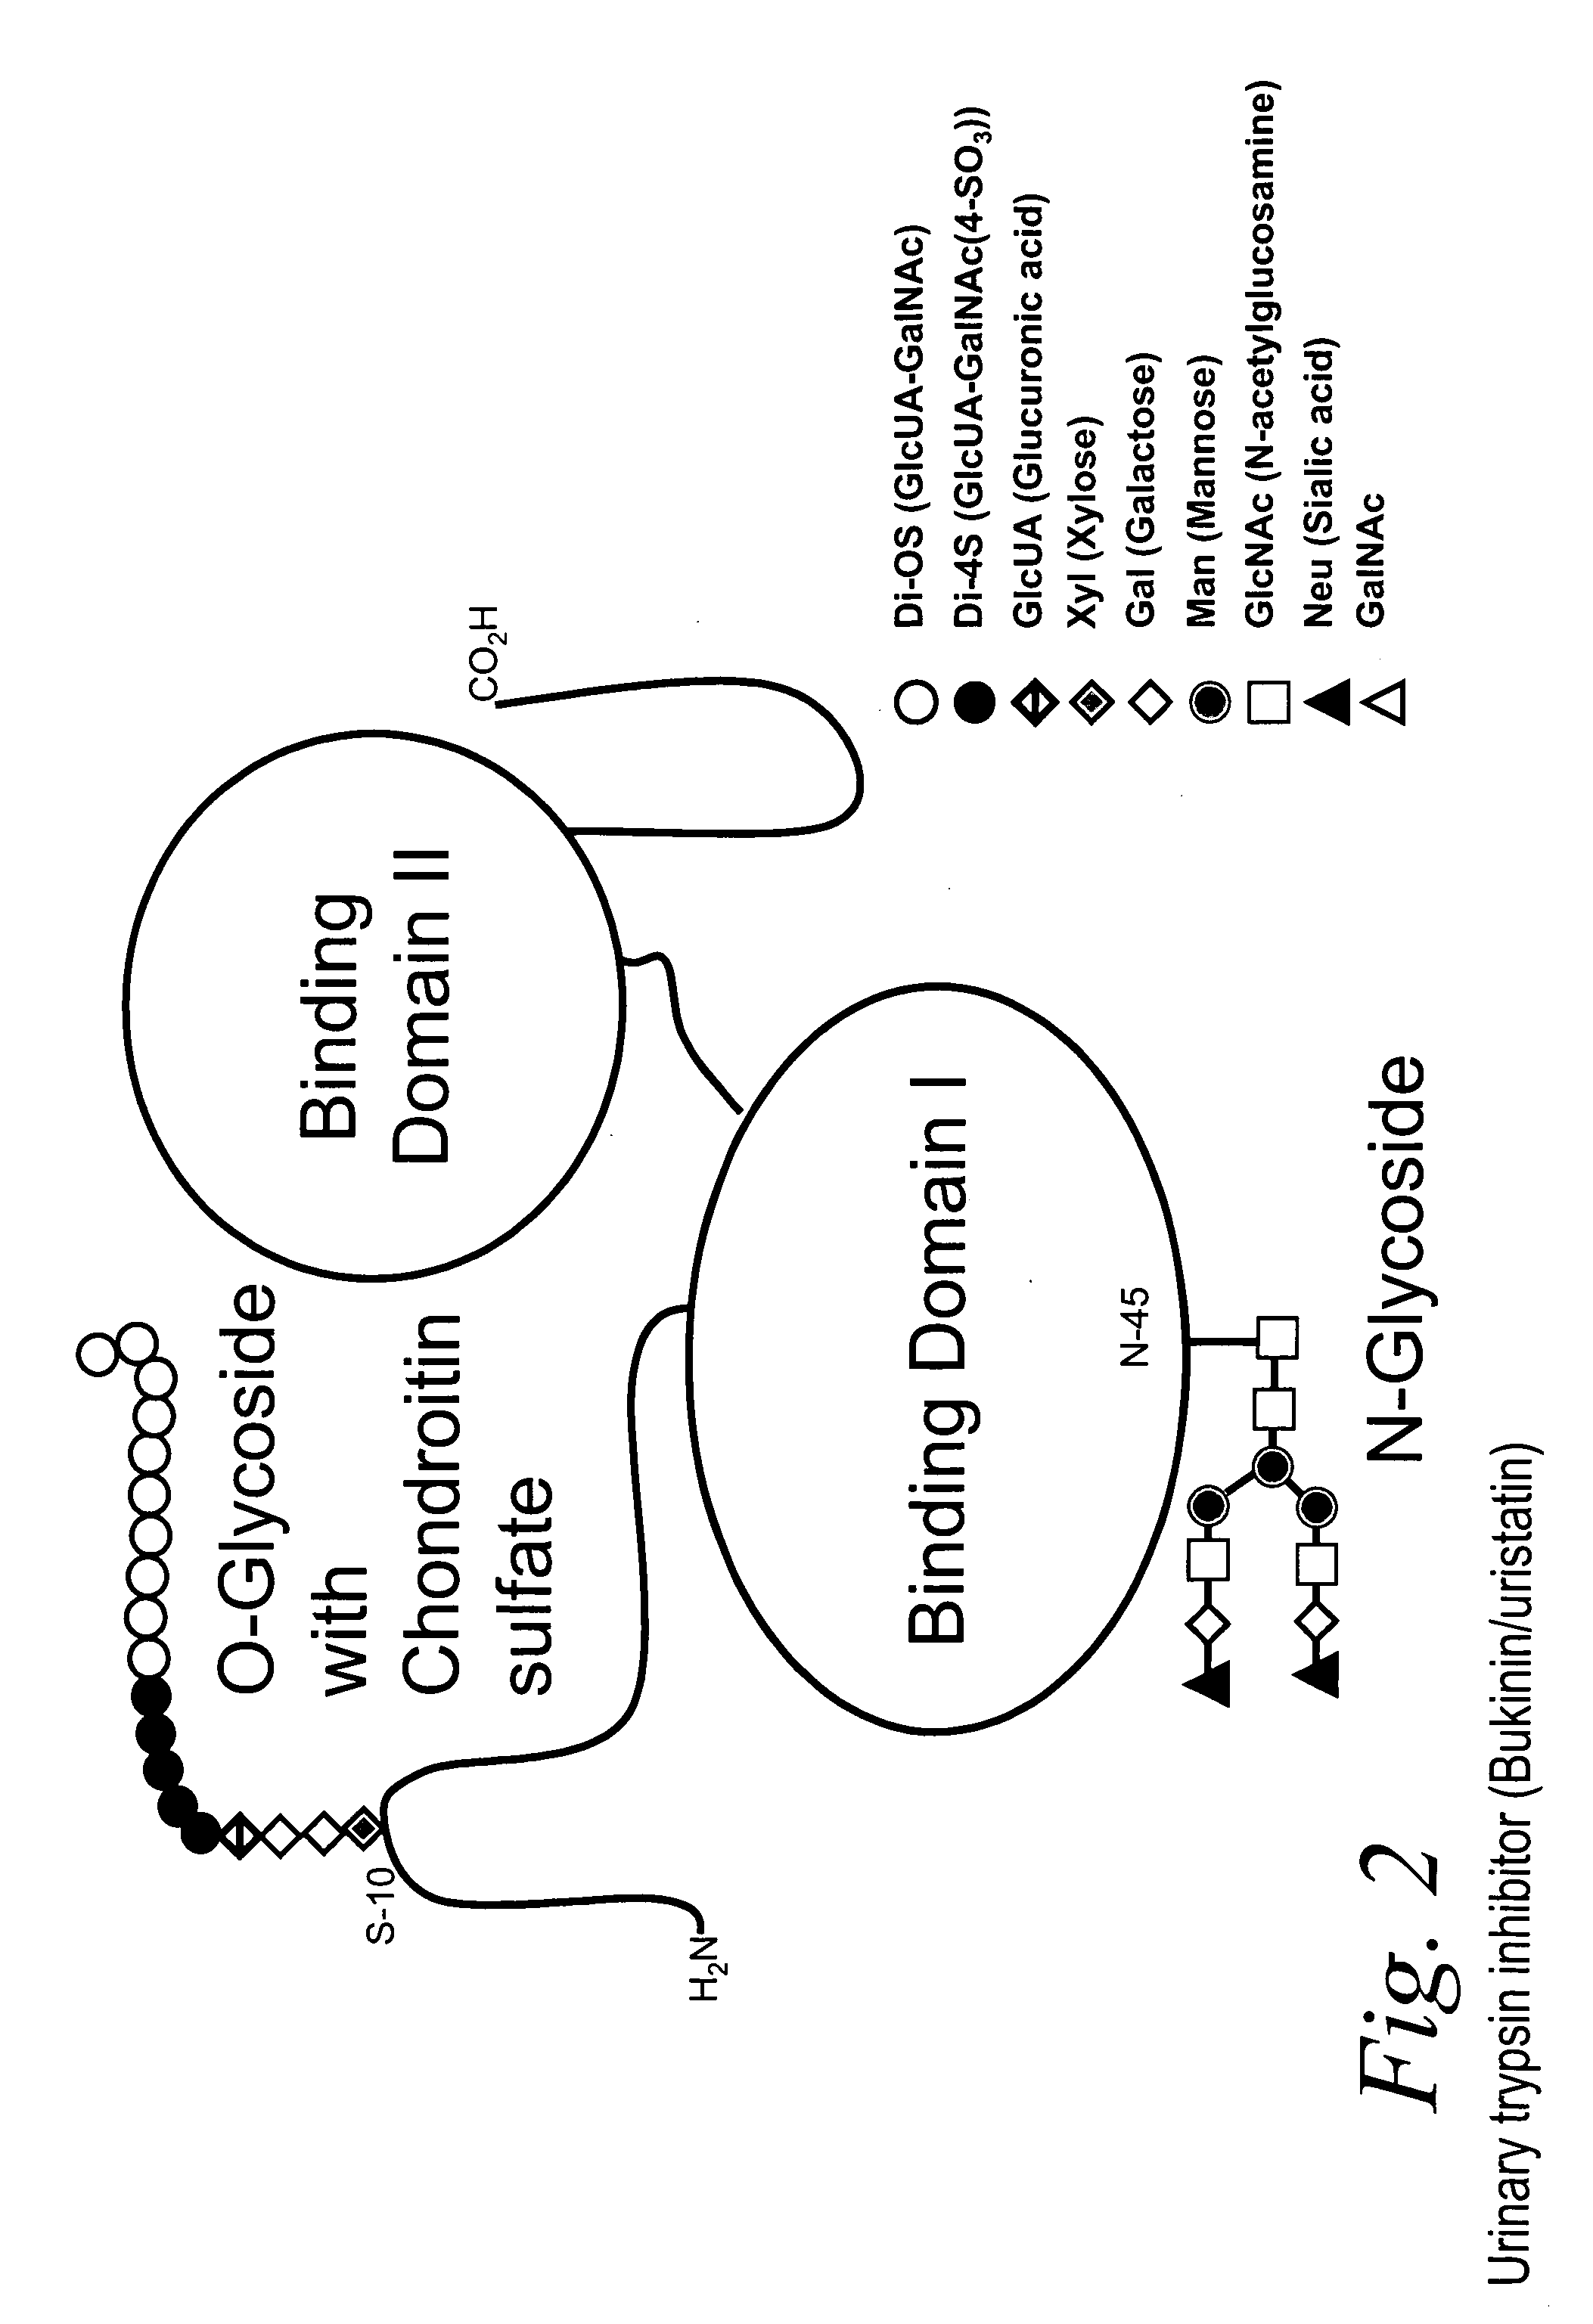 Bacterial test method by glycated label binding